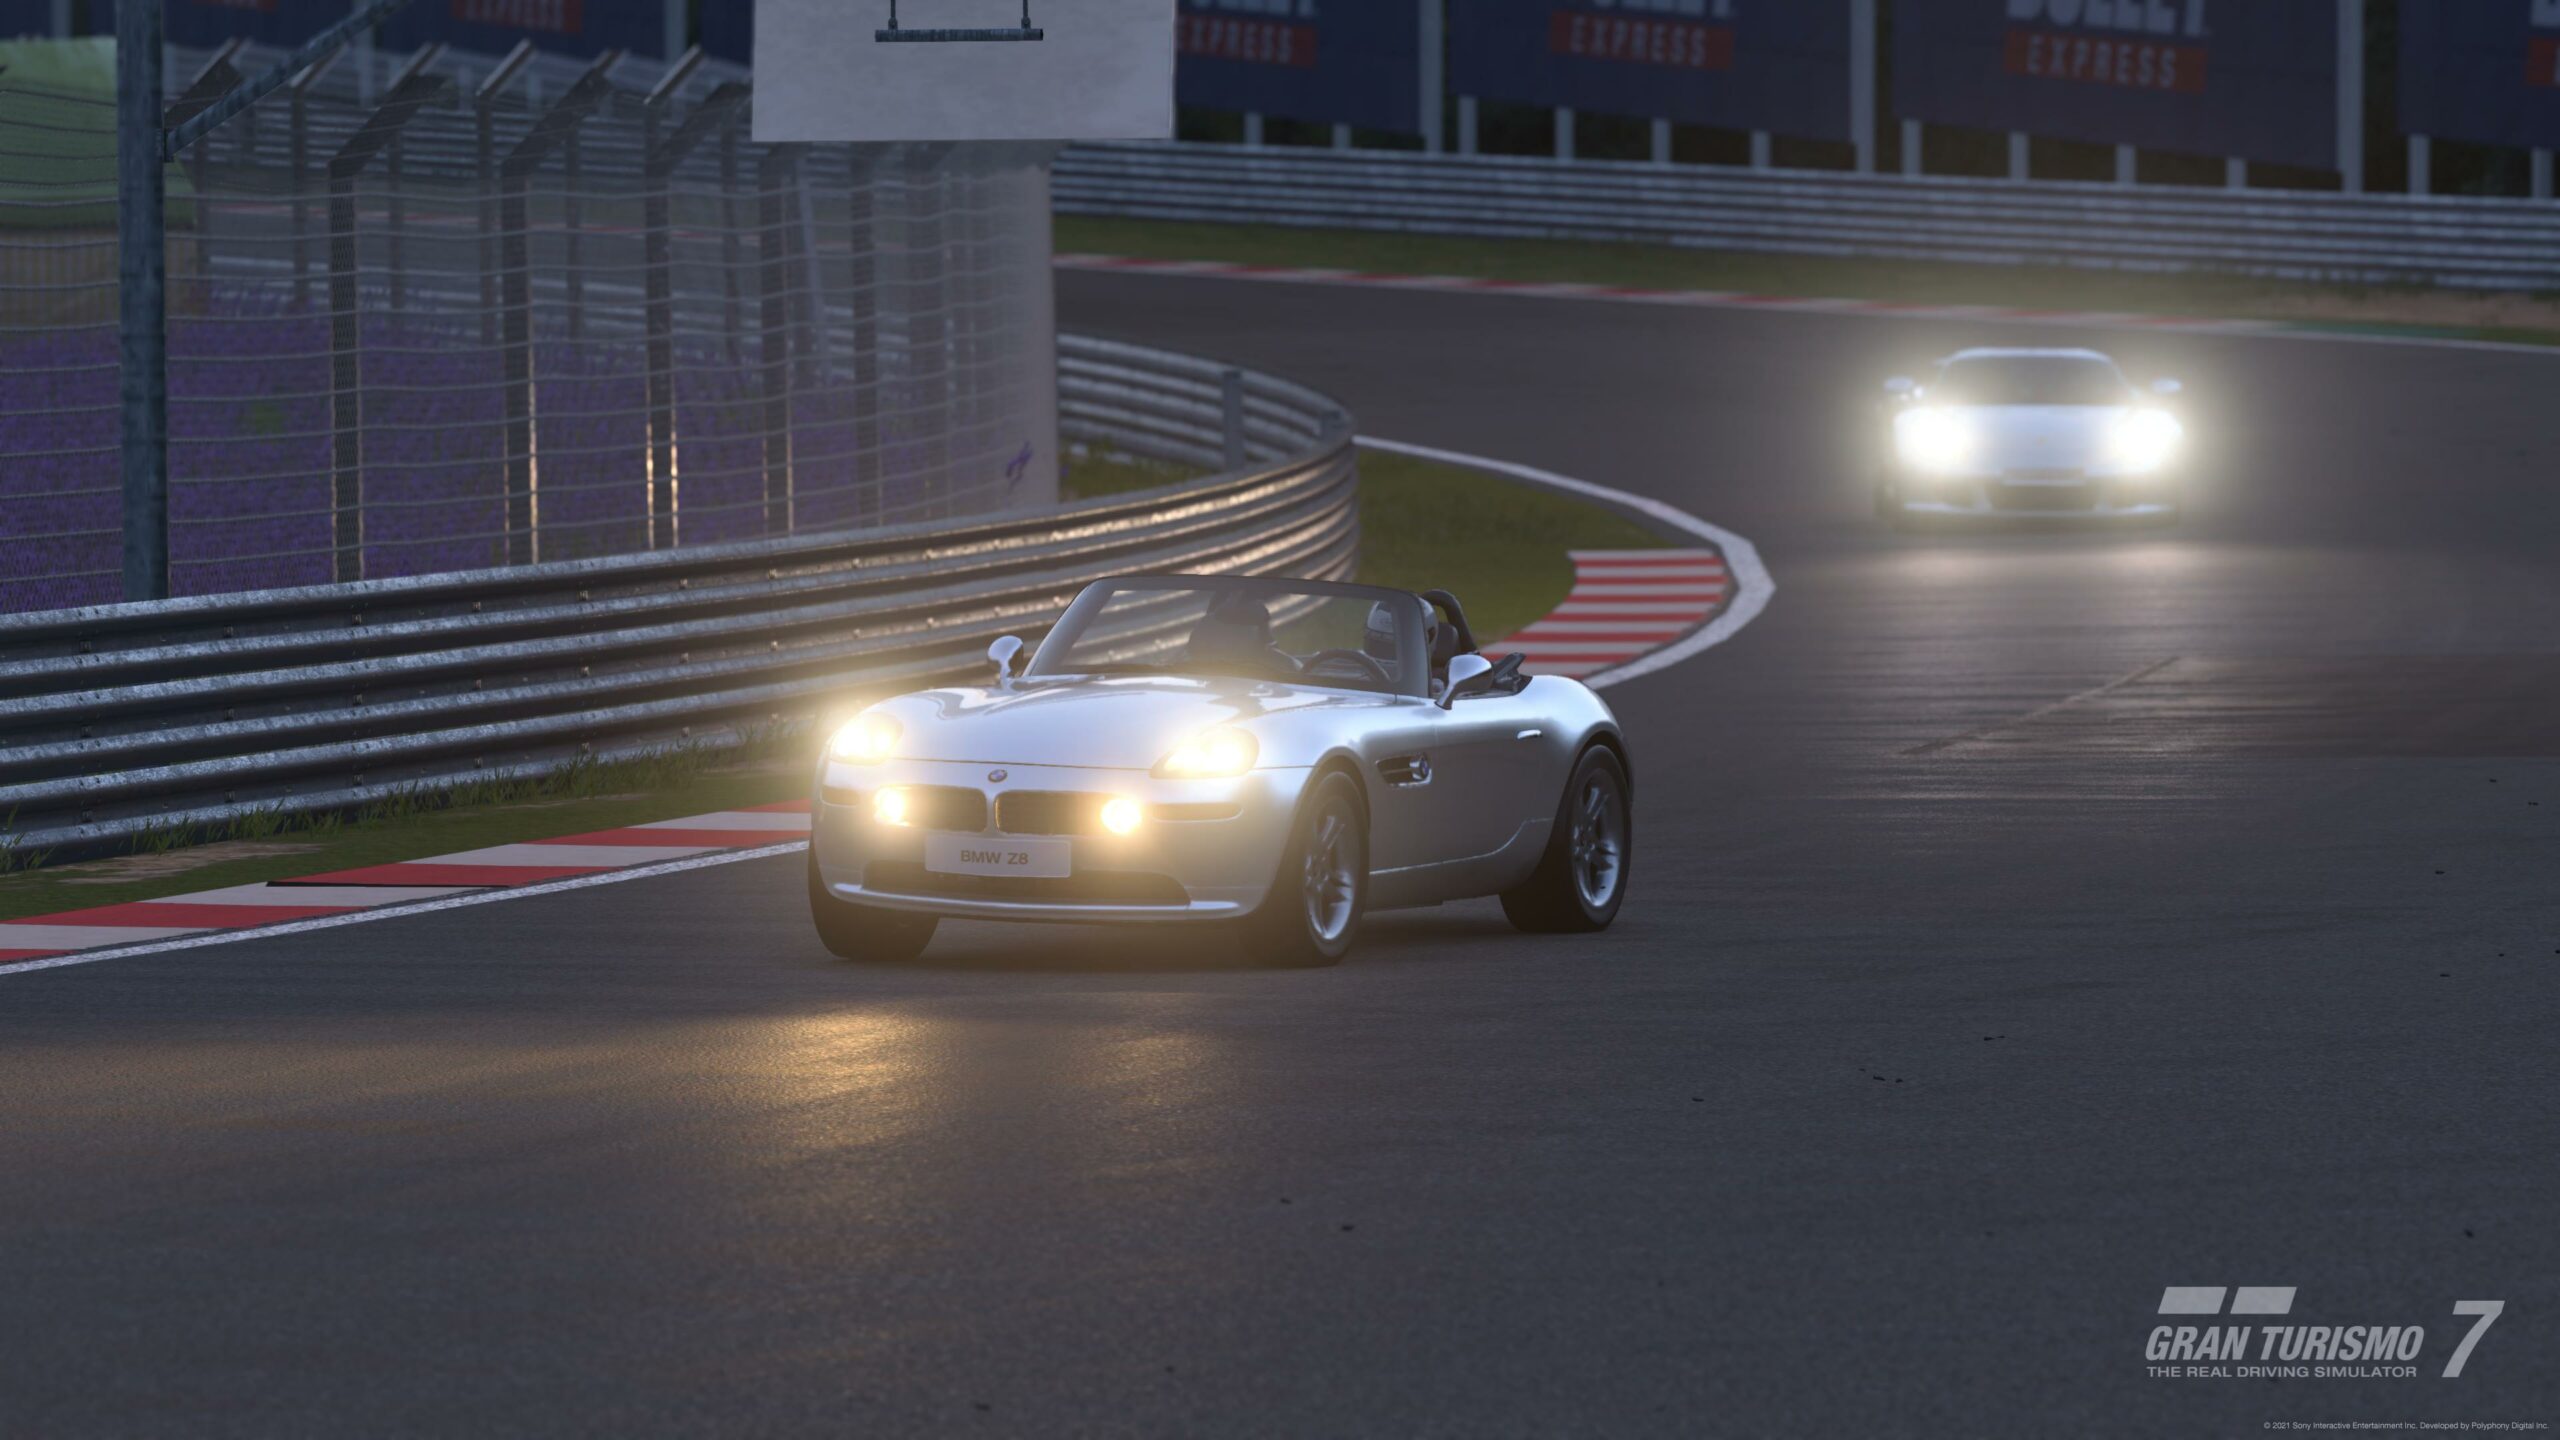 Gran Turismo 7 update pushes its best cars out of your reach